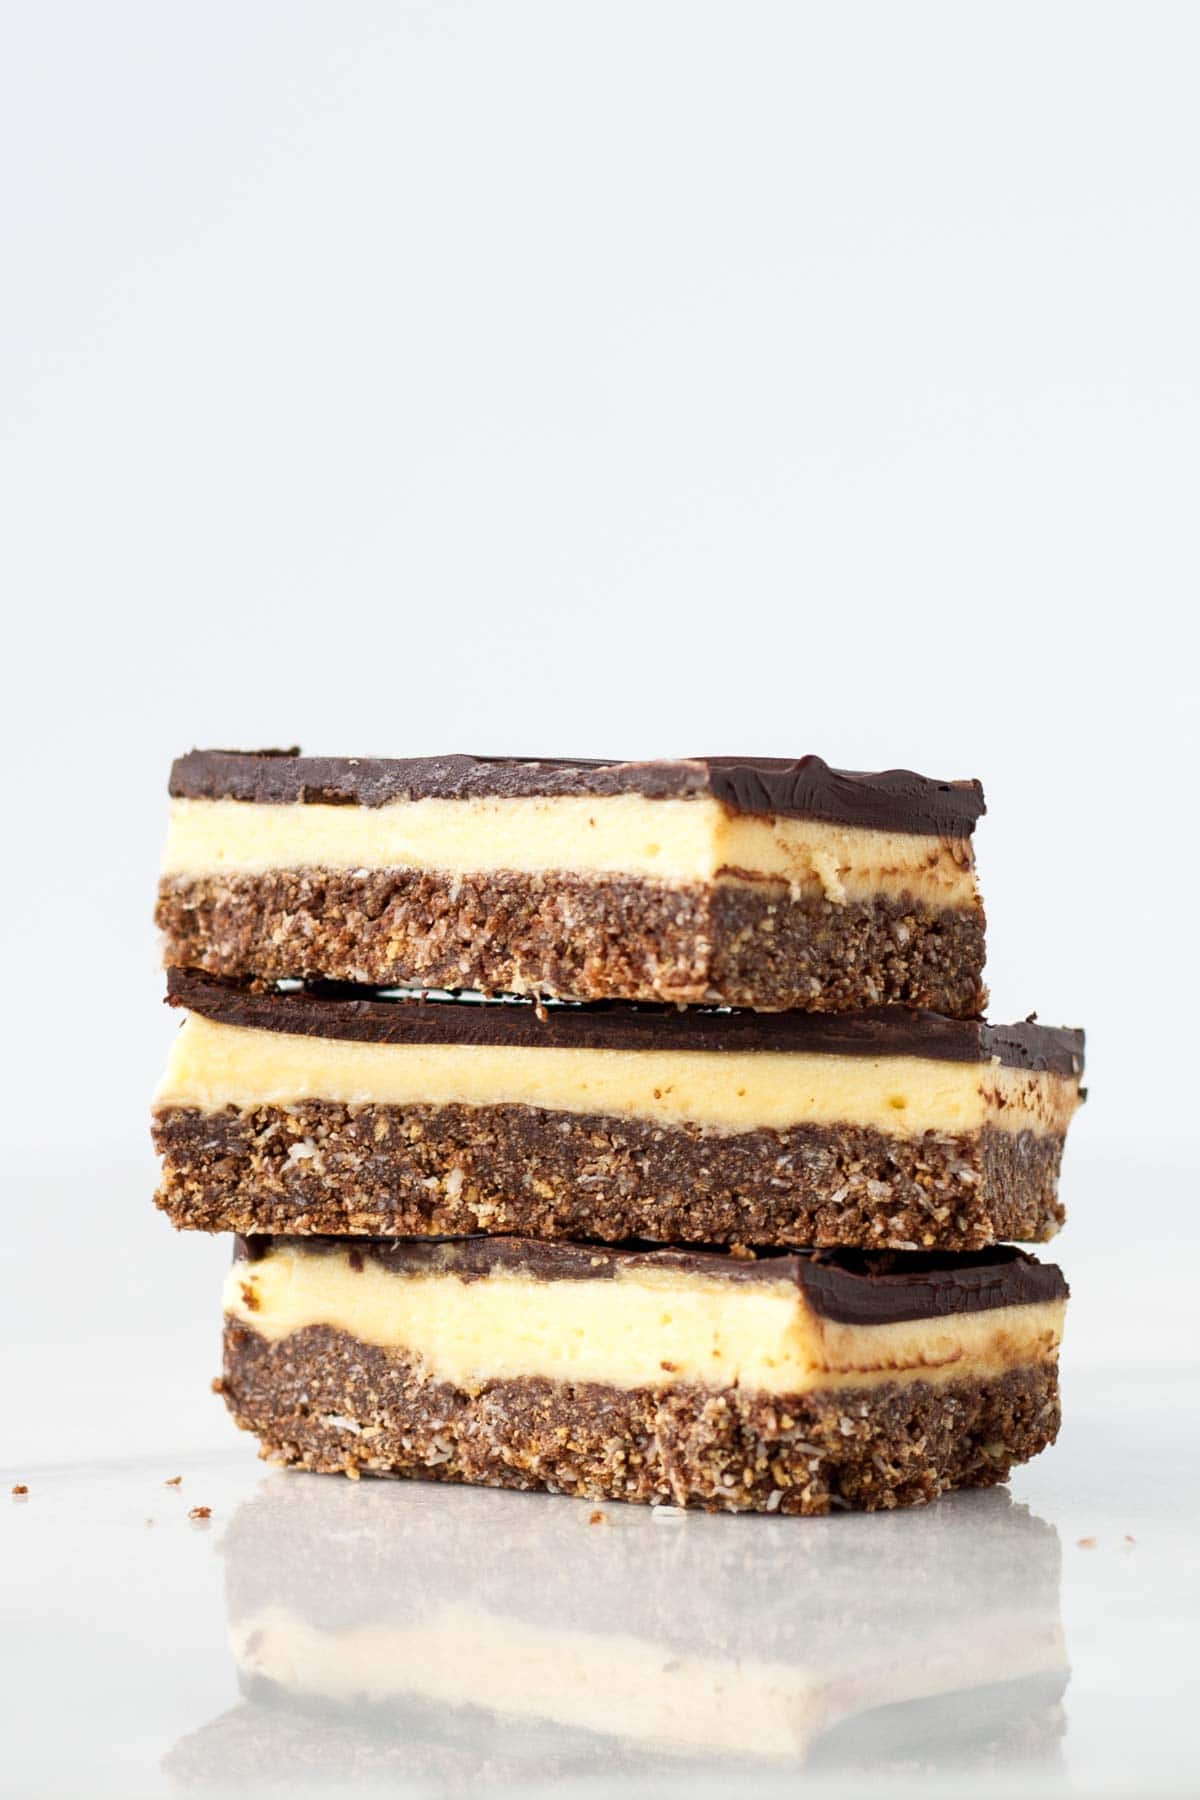 Three Nanaimo bars stacked on each other.